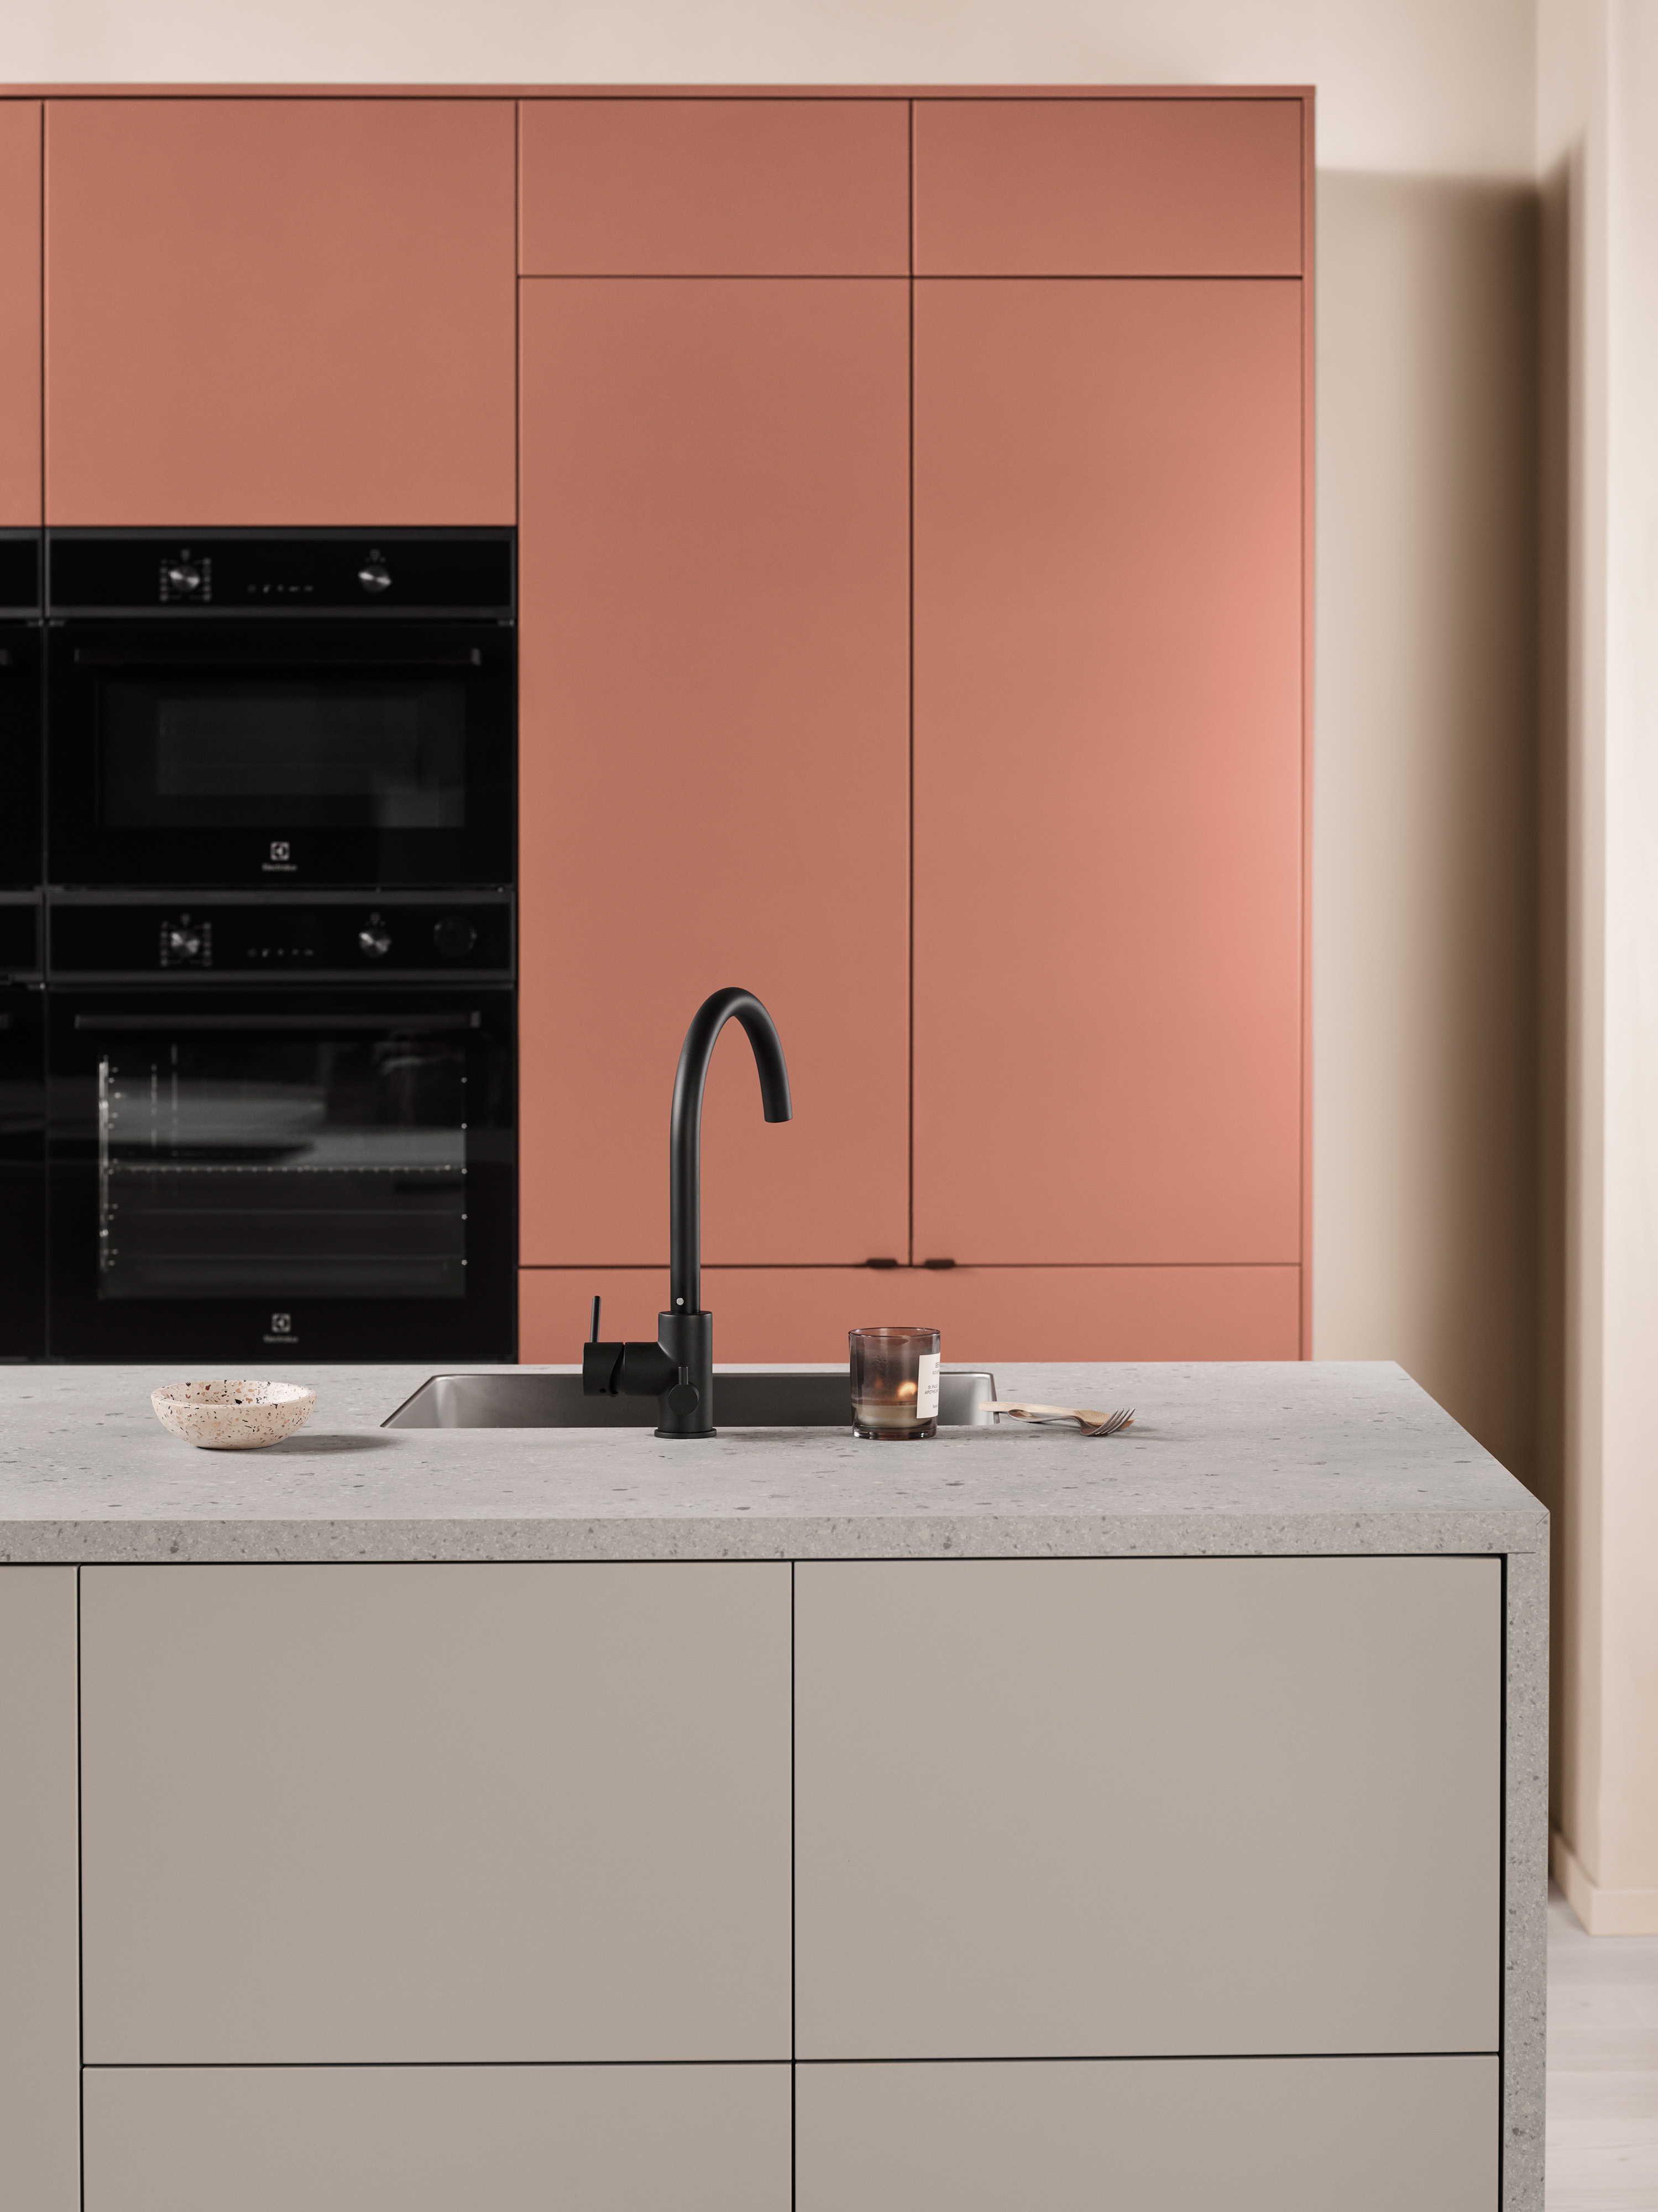 Epoq kitchen without handles - Epoq Trend kitchen red clay and grey